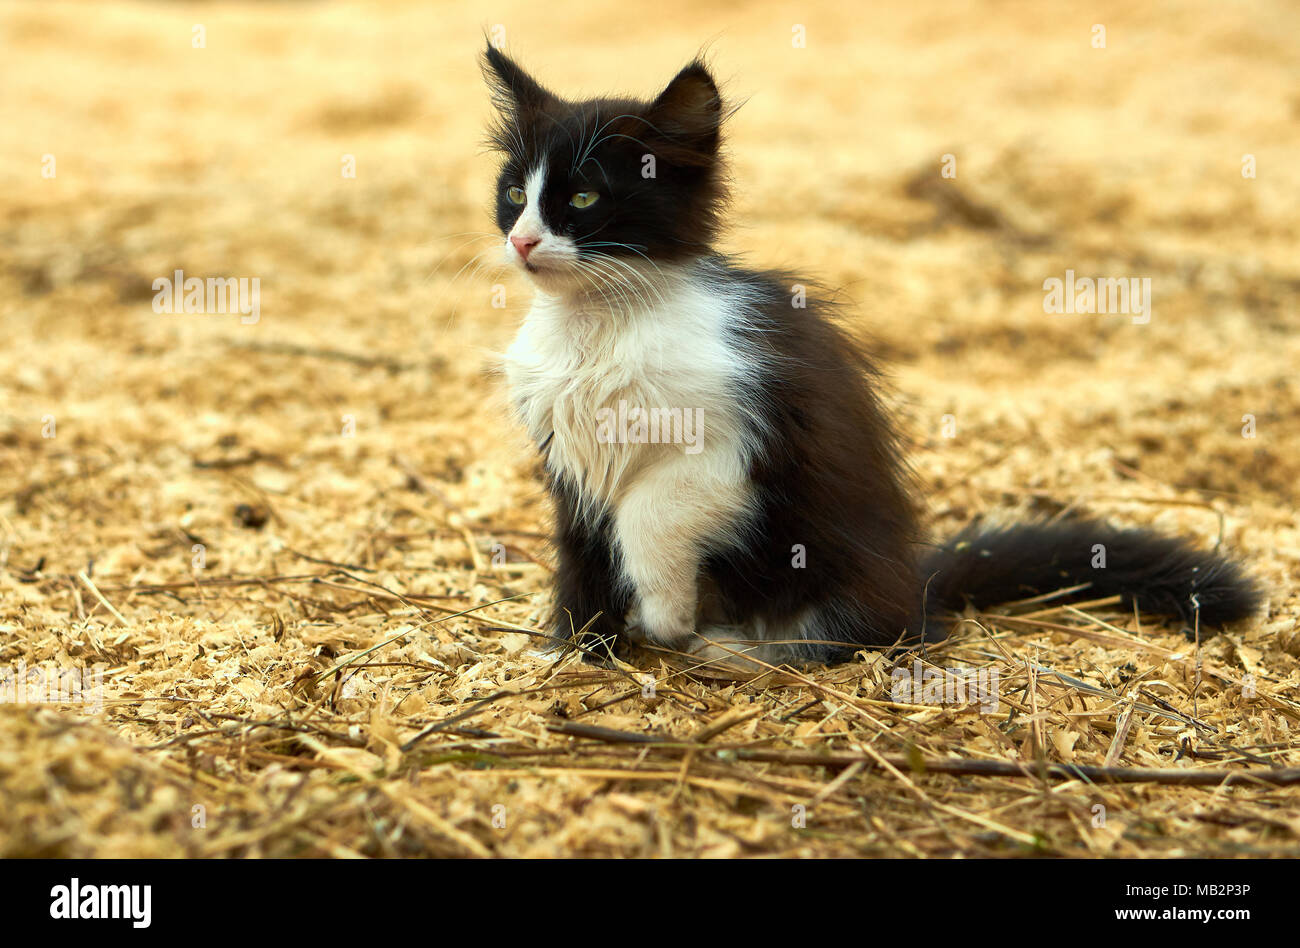 Cute black and white cat sitting on the dry hay on the farm looking forward one paw raised slightly waiting for somebody Photo Alamy